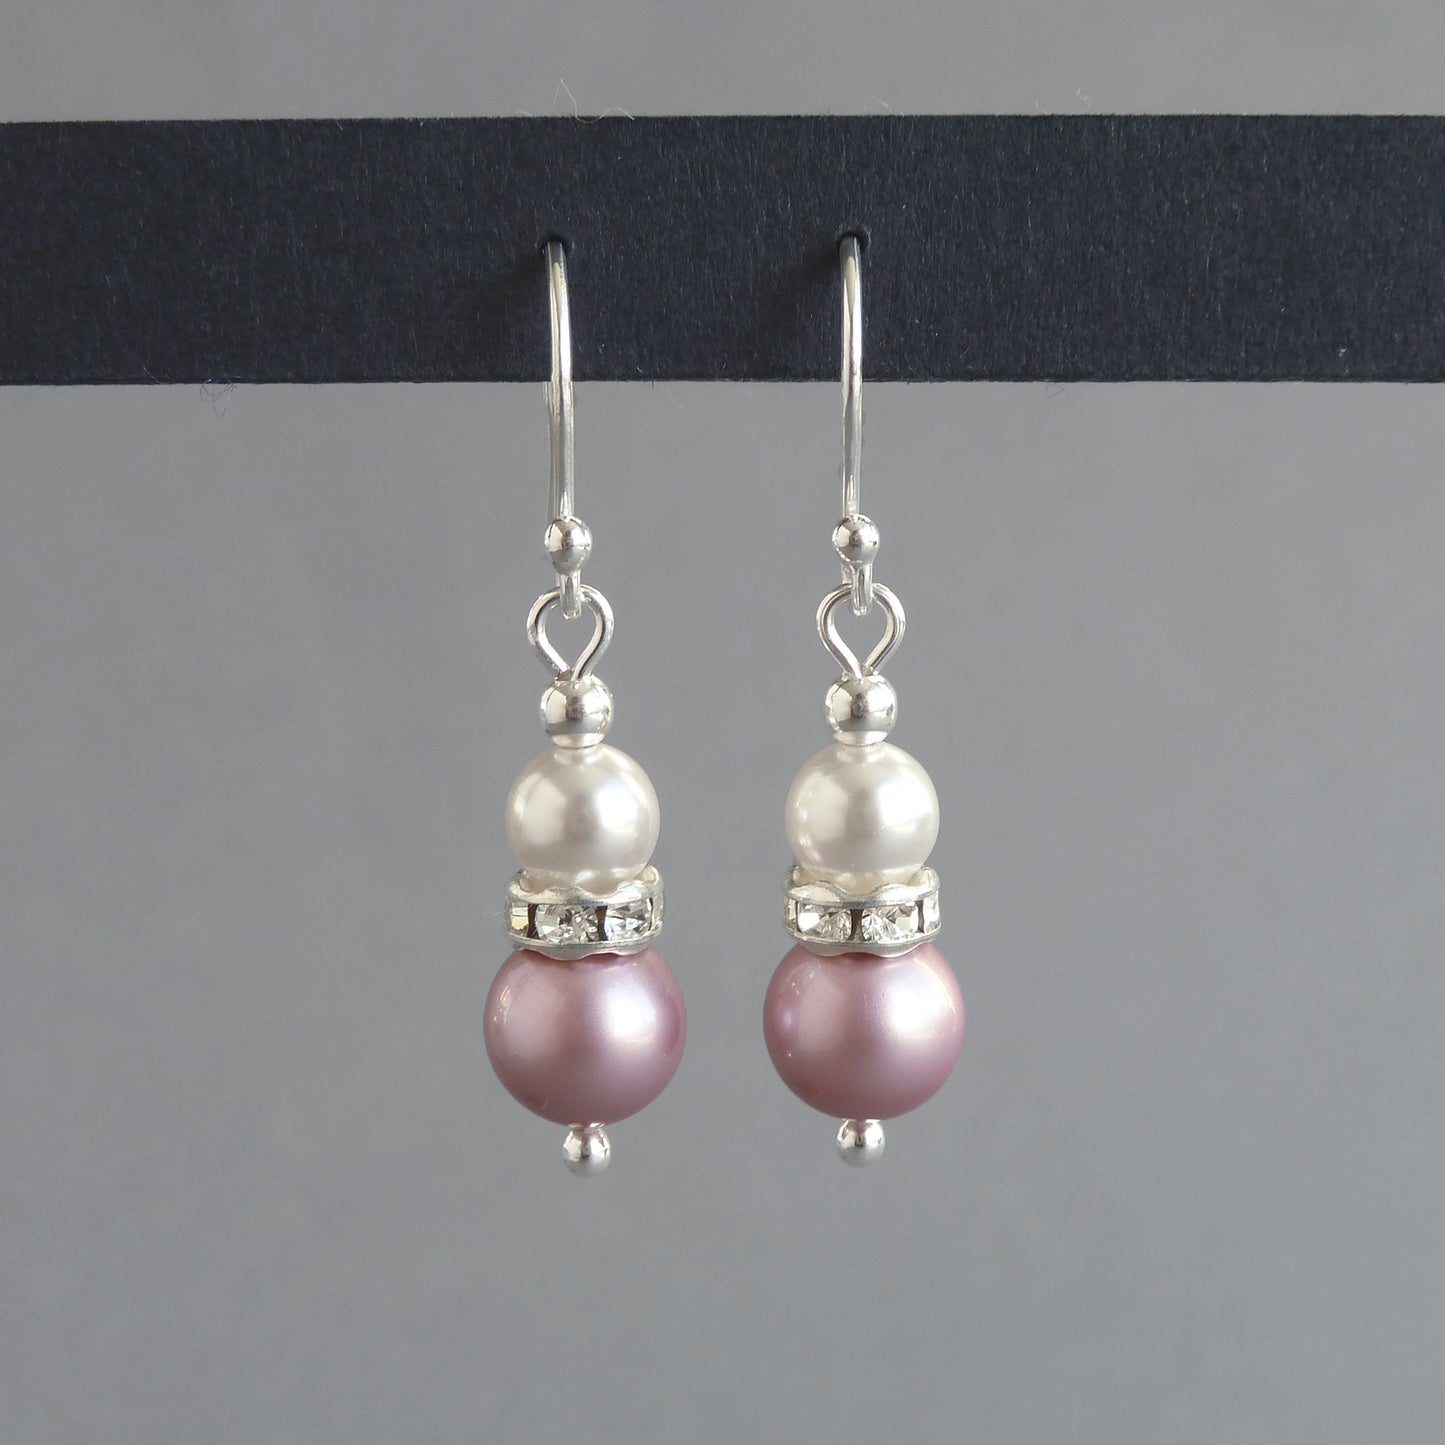 Dusky pink and white pearl earrings